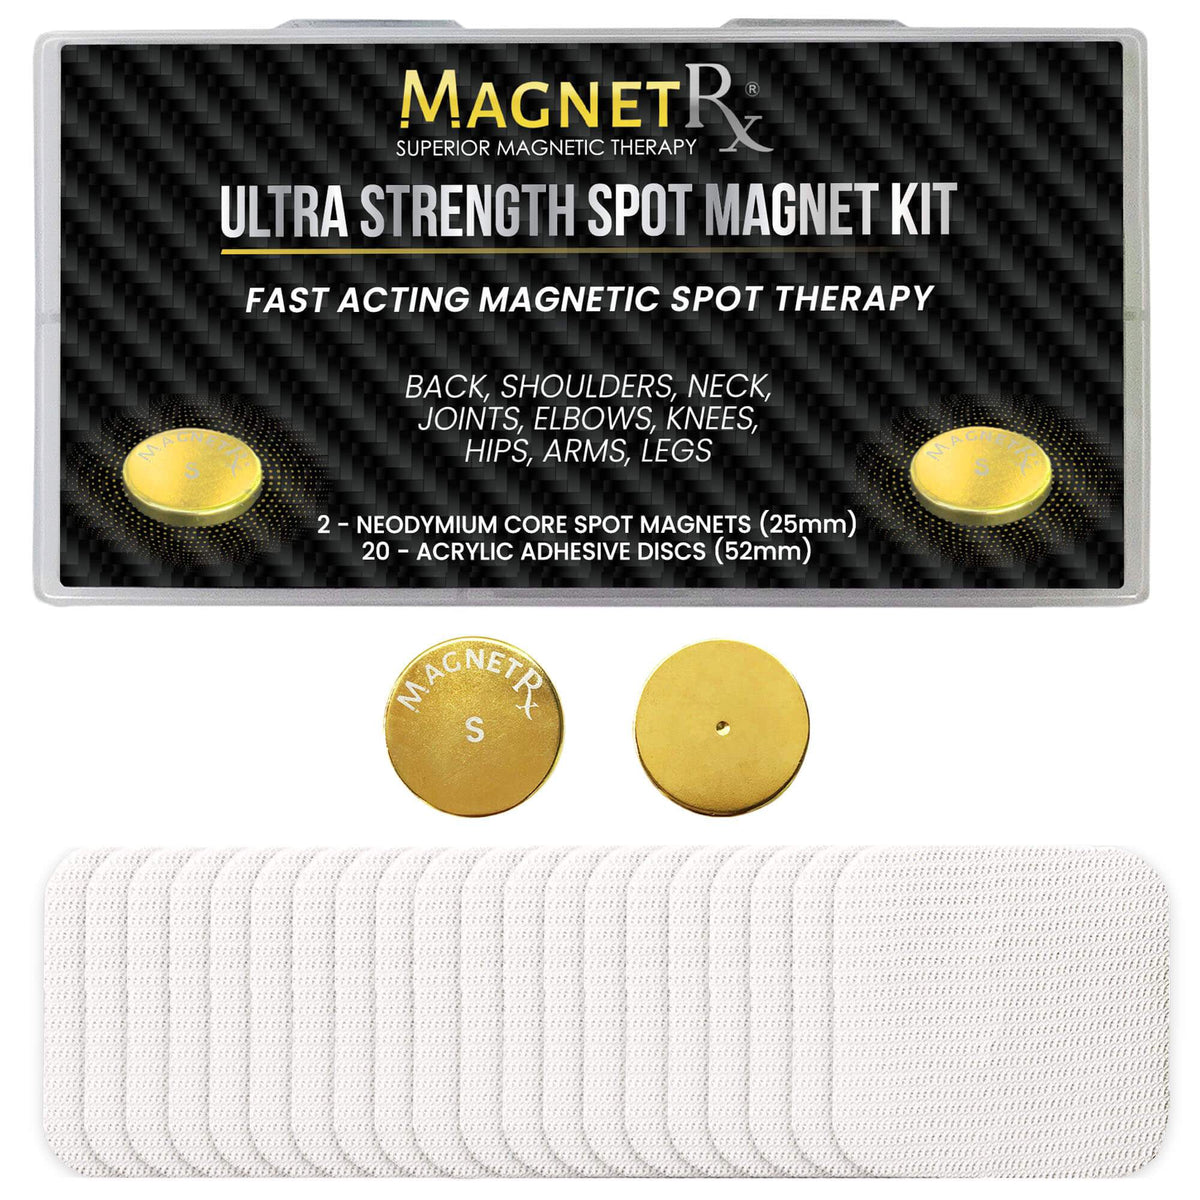 15 Bio Magnetic Recovery Joint Patches – For Sport Recovery